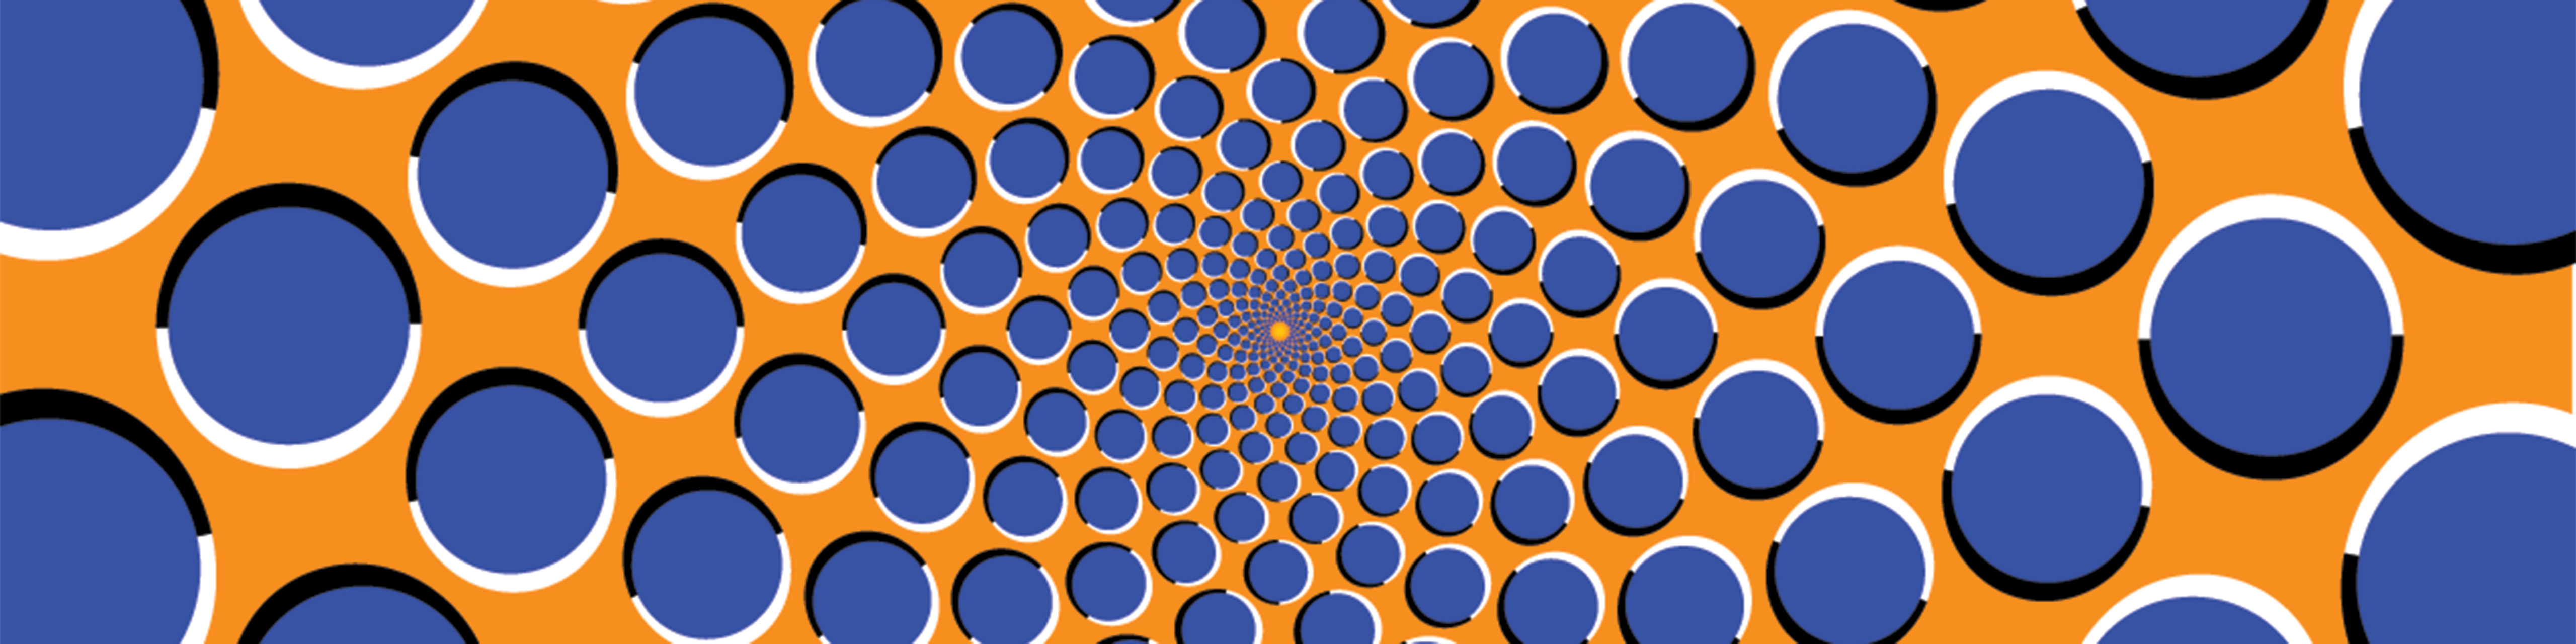 Blue dots on an orange background illustrated to create the optical illusion that it's swirling counterclockwise